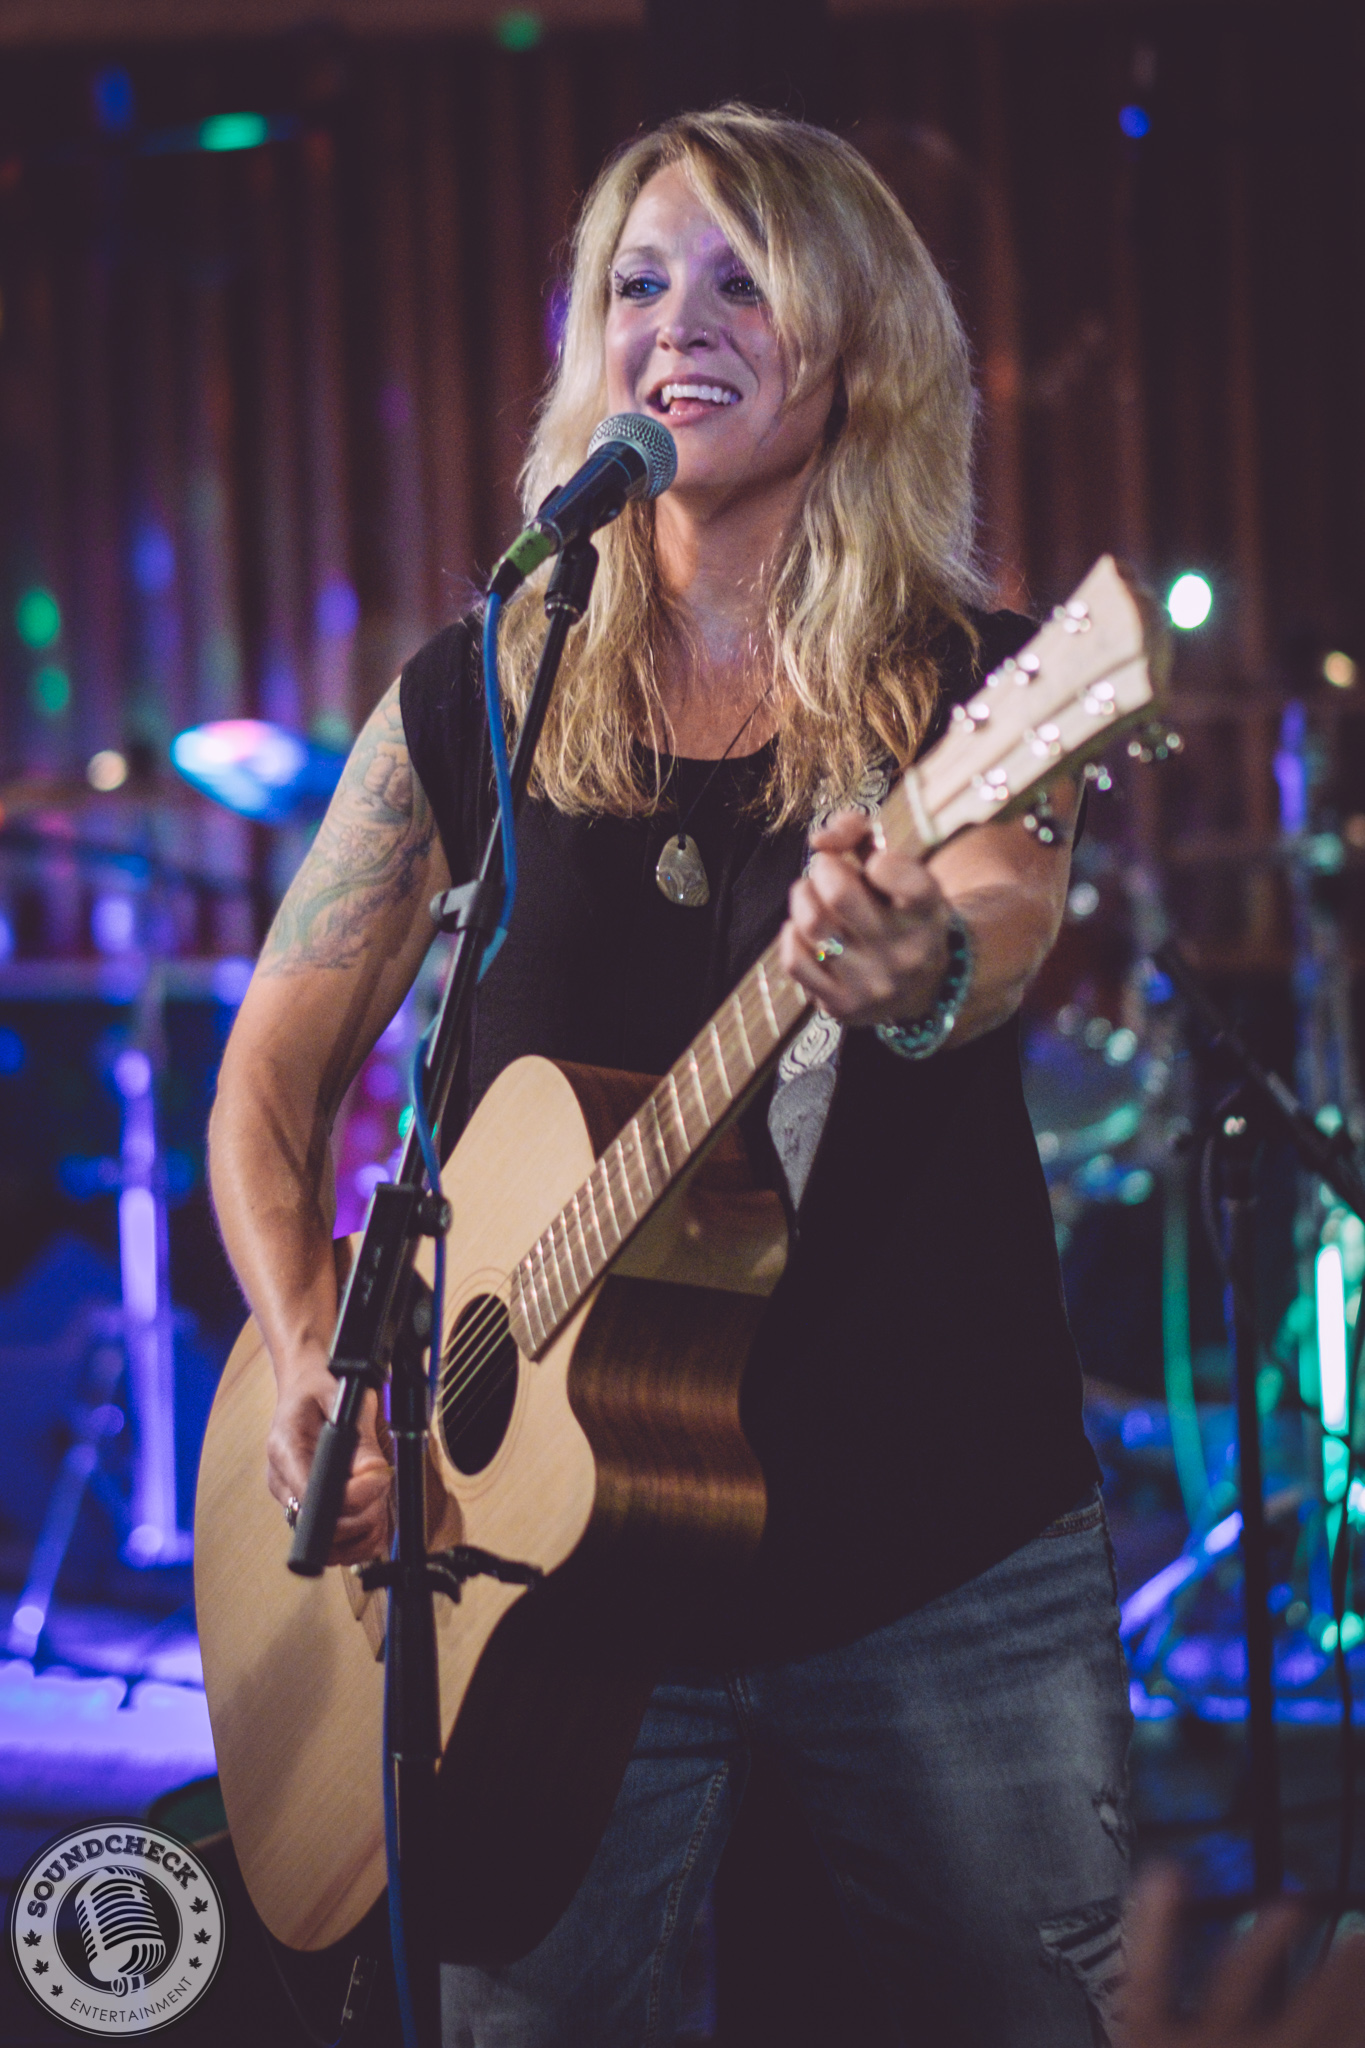 Photo Review: Sarah Smith Sessions on the River - Sound Check Entertainment